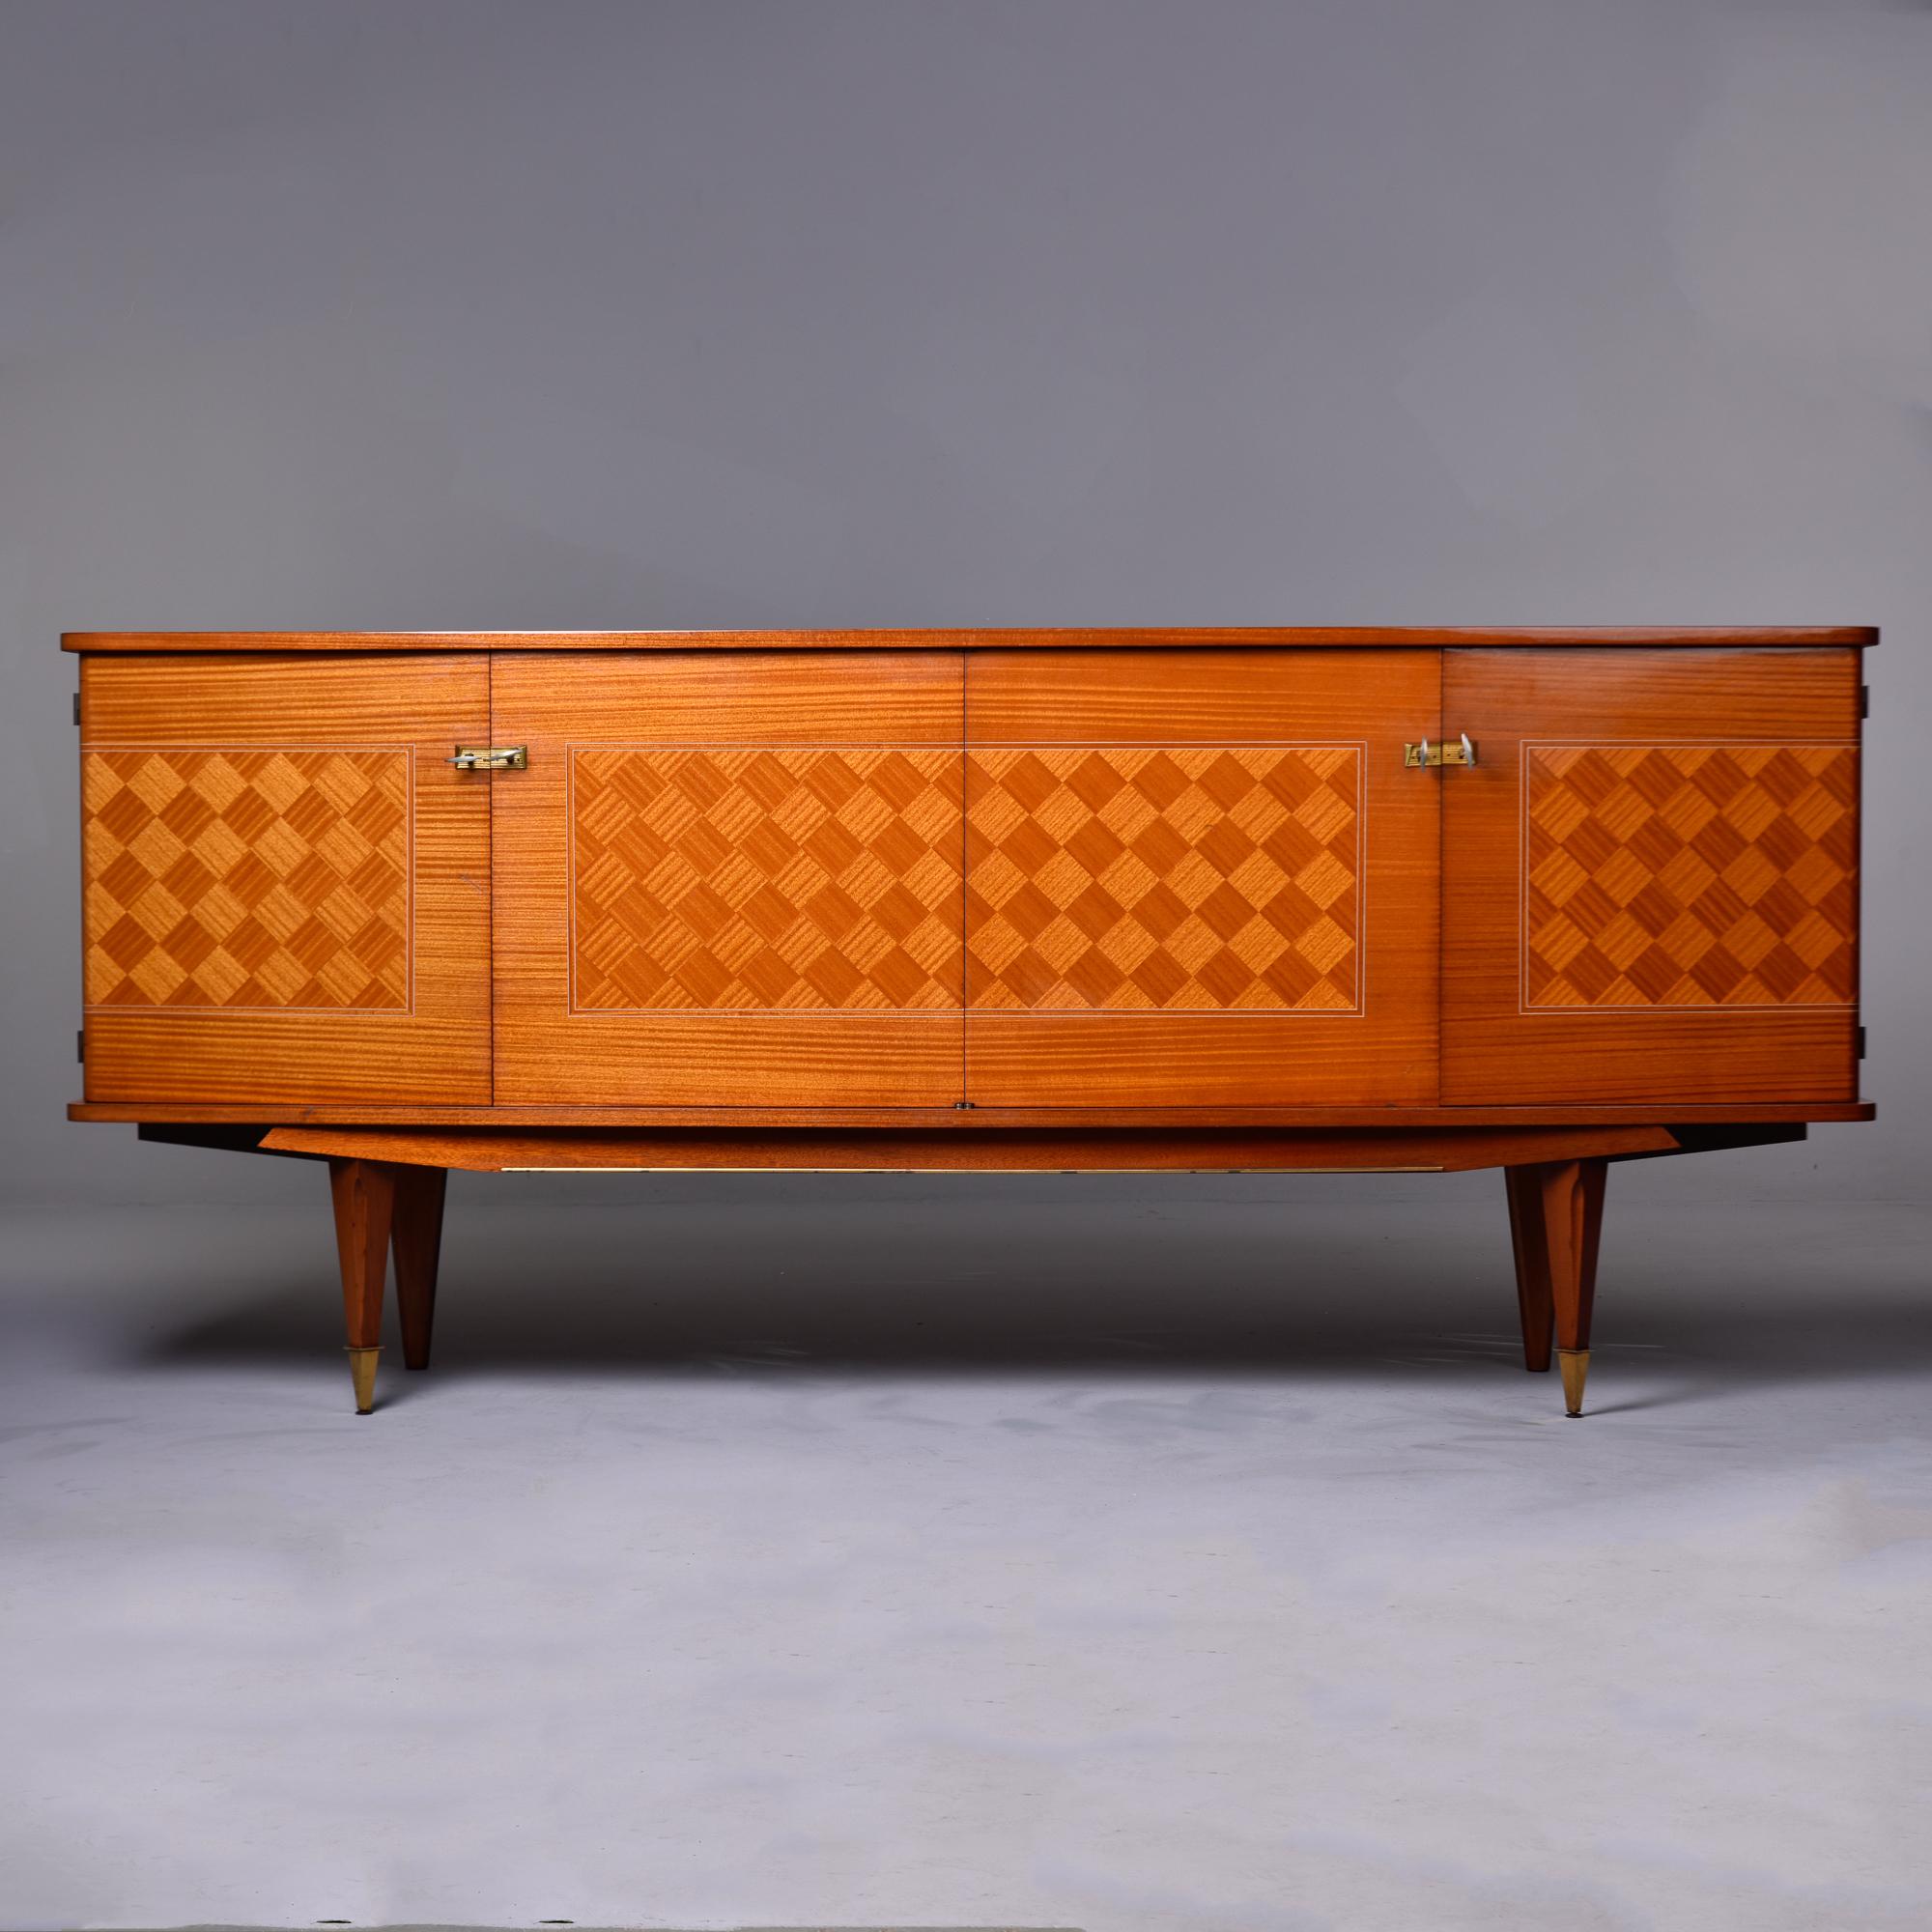 Found in France, this circa 1940s cabinet works as a buffet, credenza or sideboard. Good size at just over 88” wide. Light colored mahogany has intricate checkerboard parquetry on the door fronts and side panels. Lots of storage - middle compartment